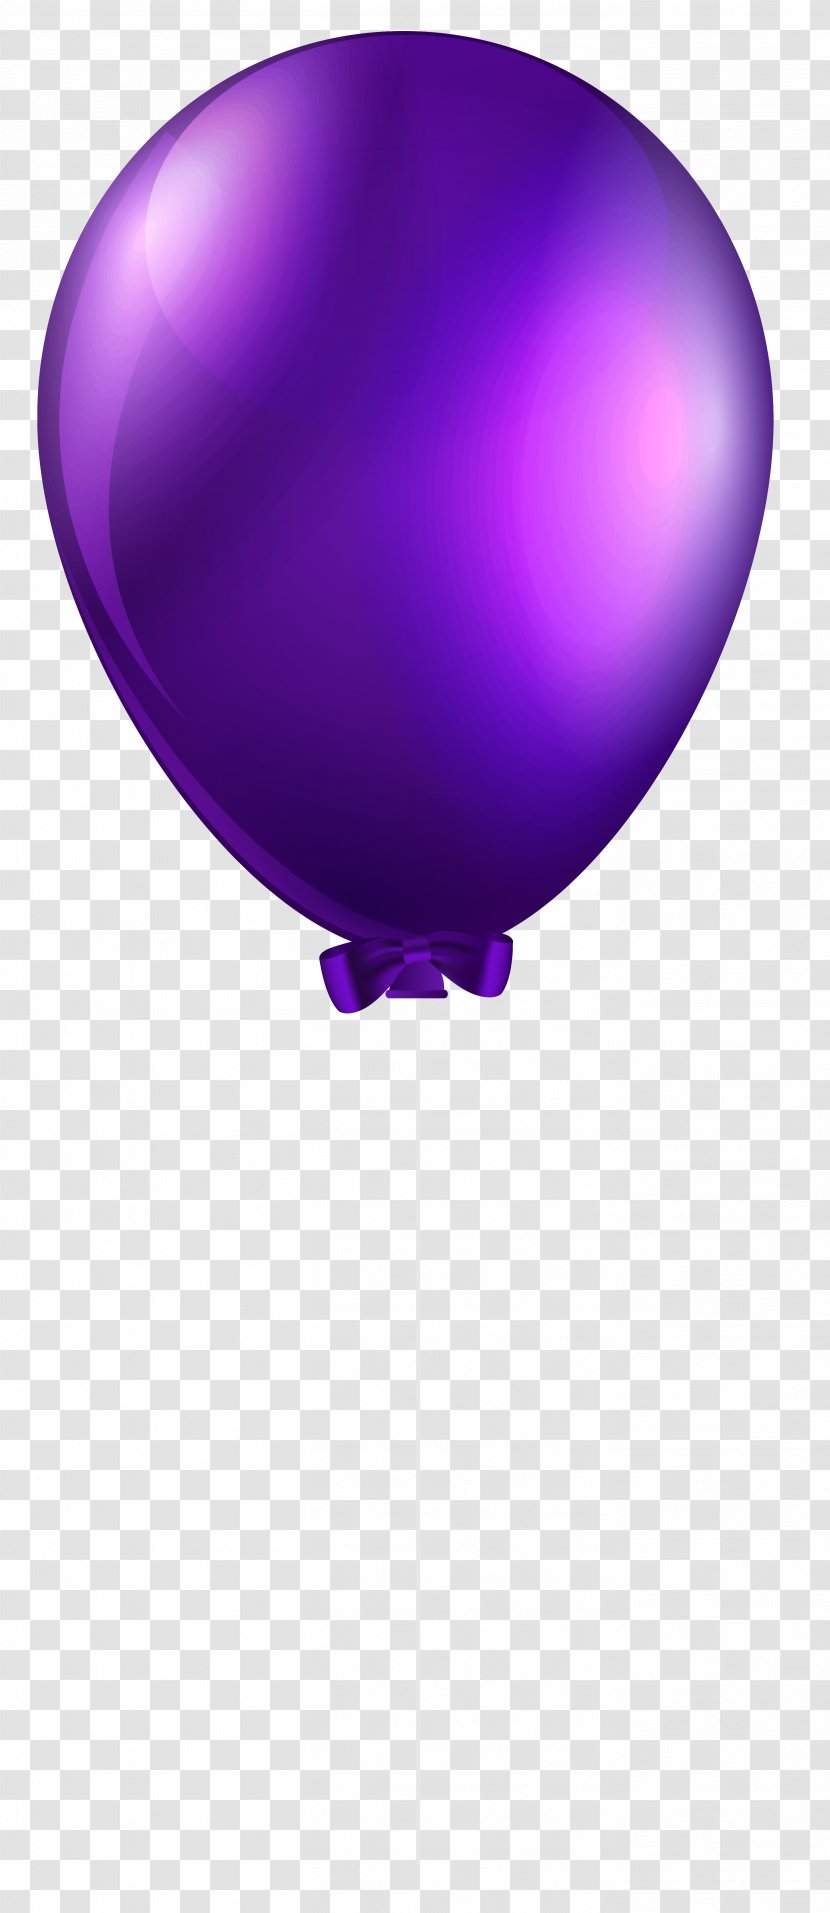 Balloon Birthday Clip Art - Party Hat Transparent PNG